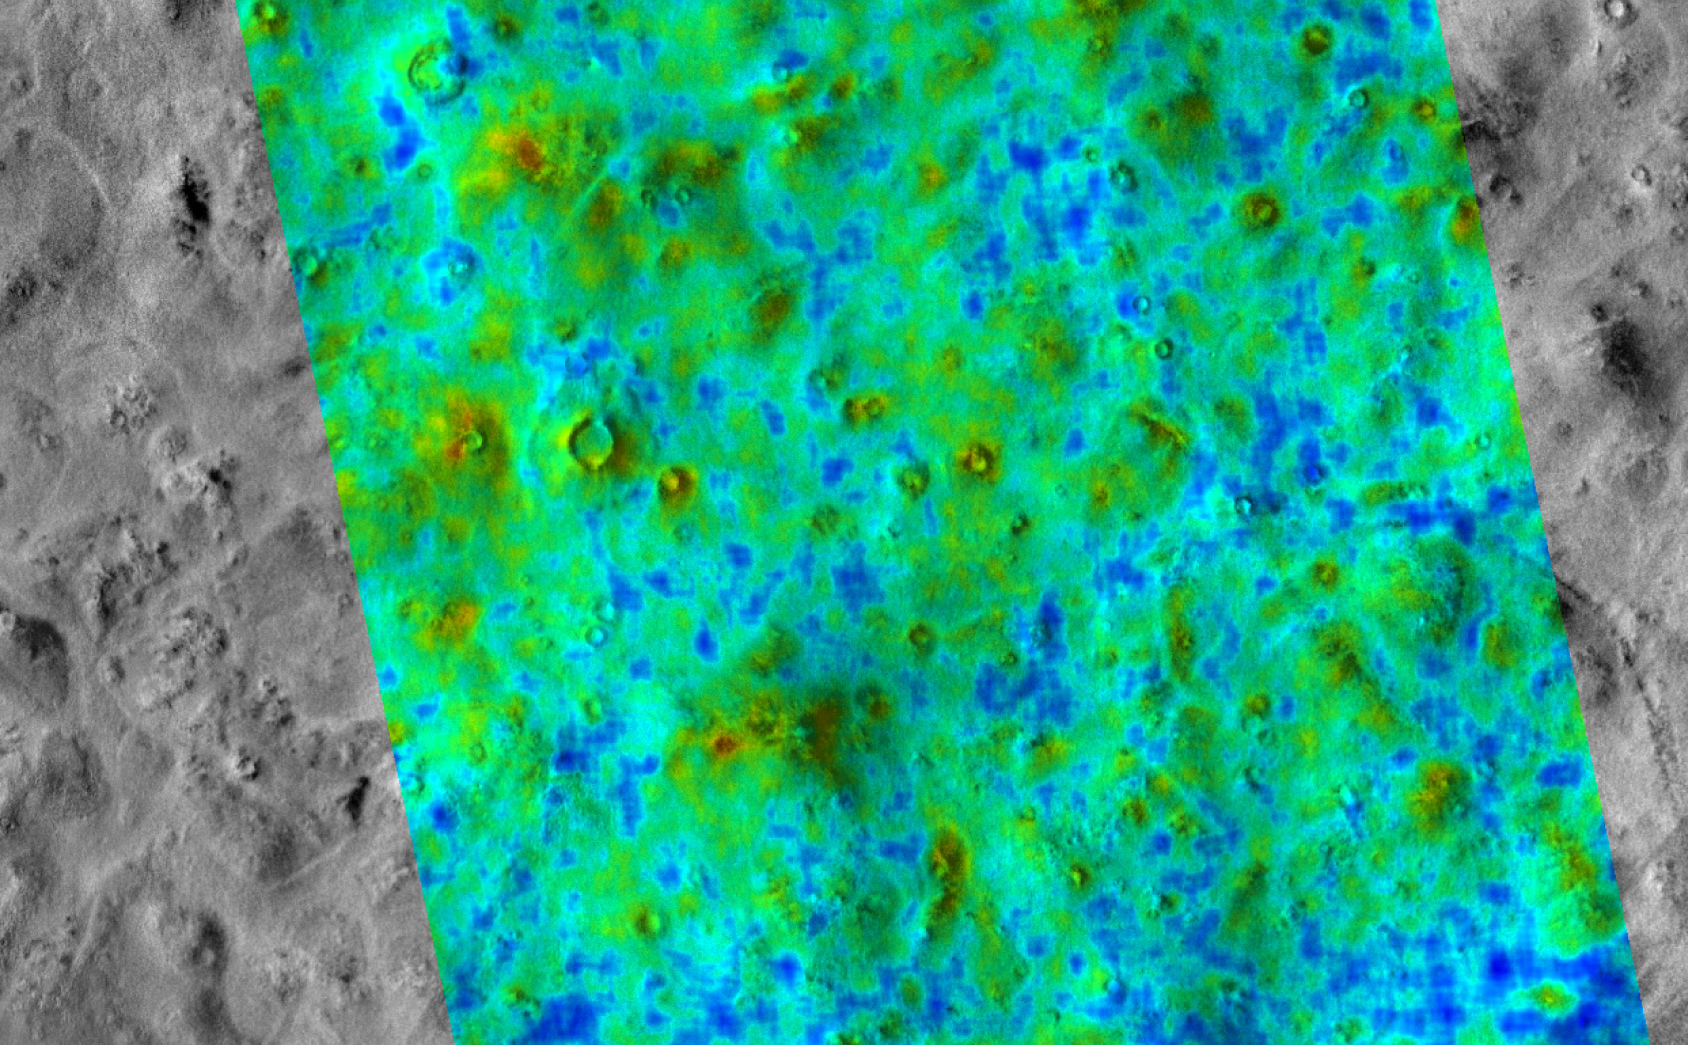 Depth-to-Ice Map of an Arctic Site on Mars